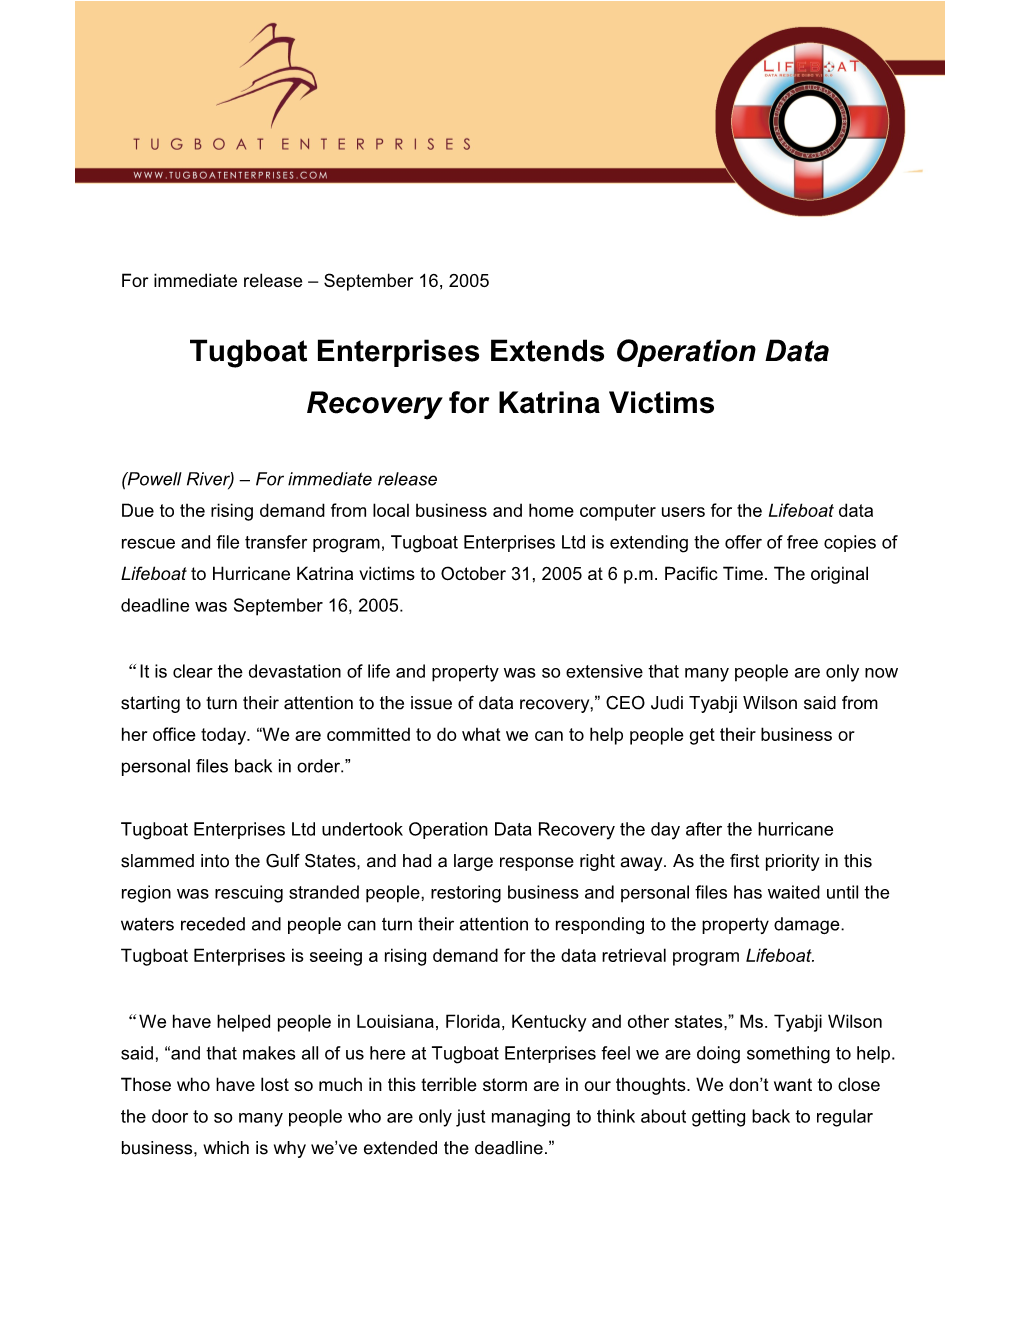 For Immediate Release August 16, 2005